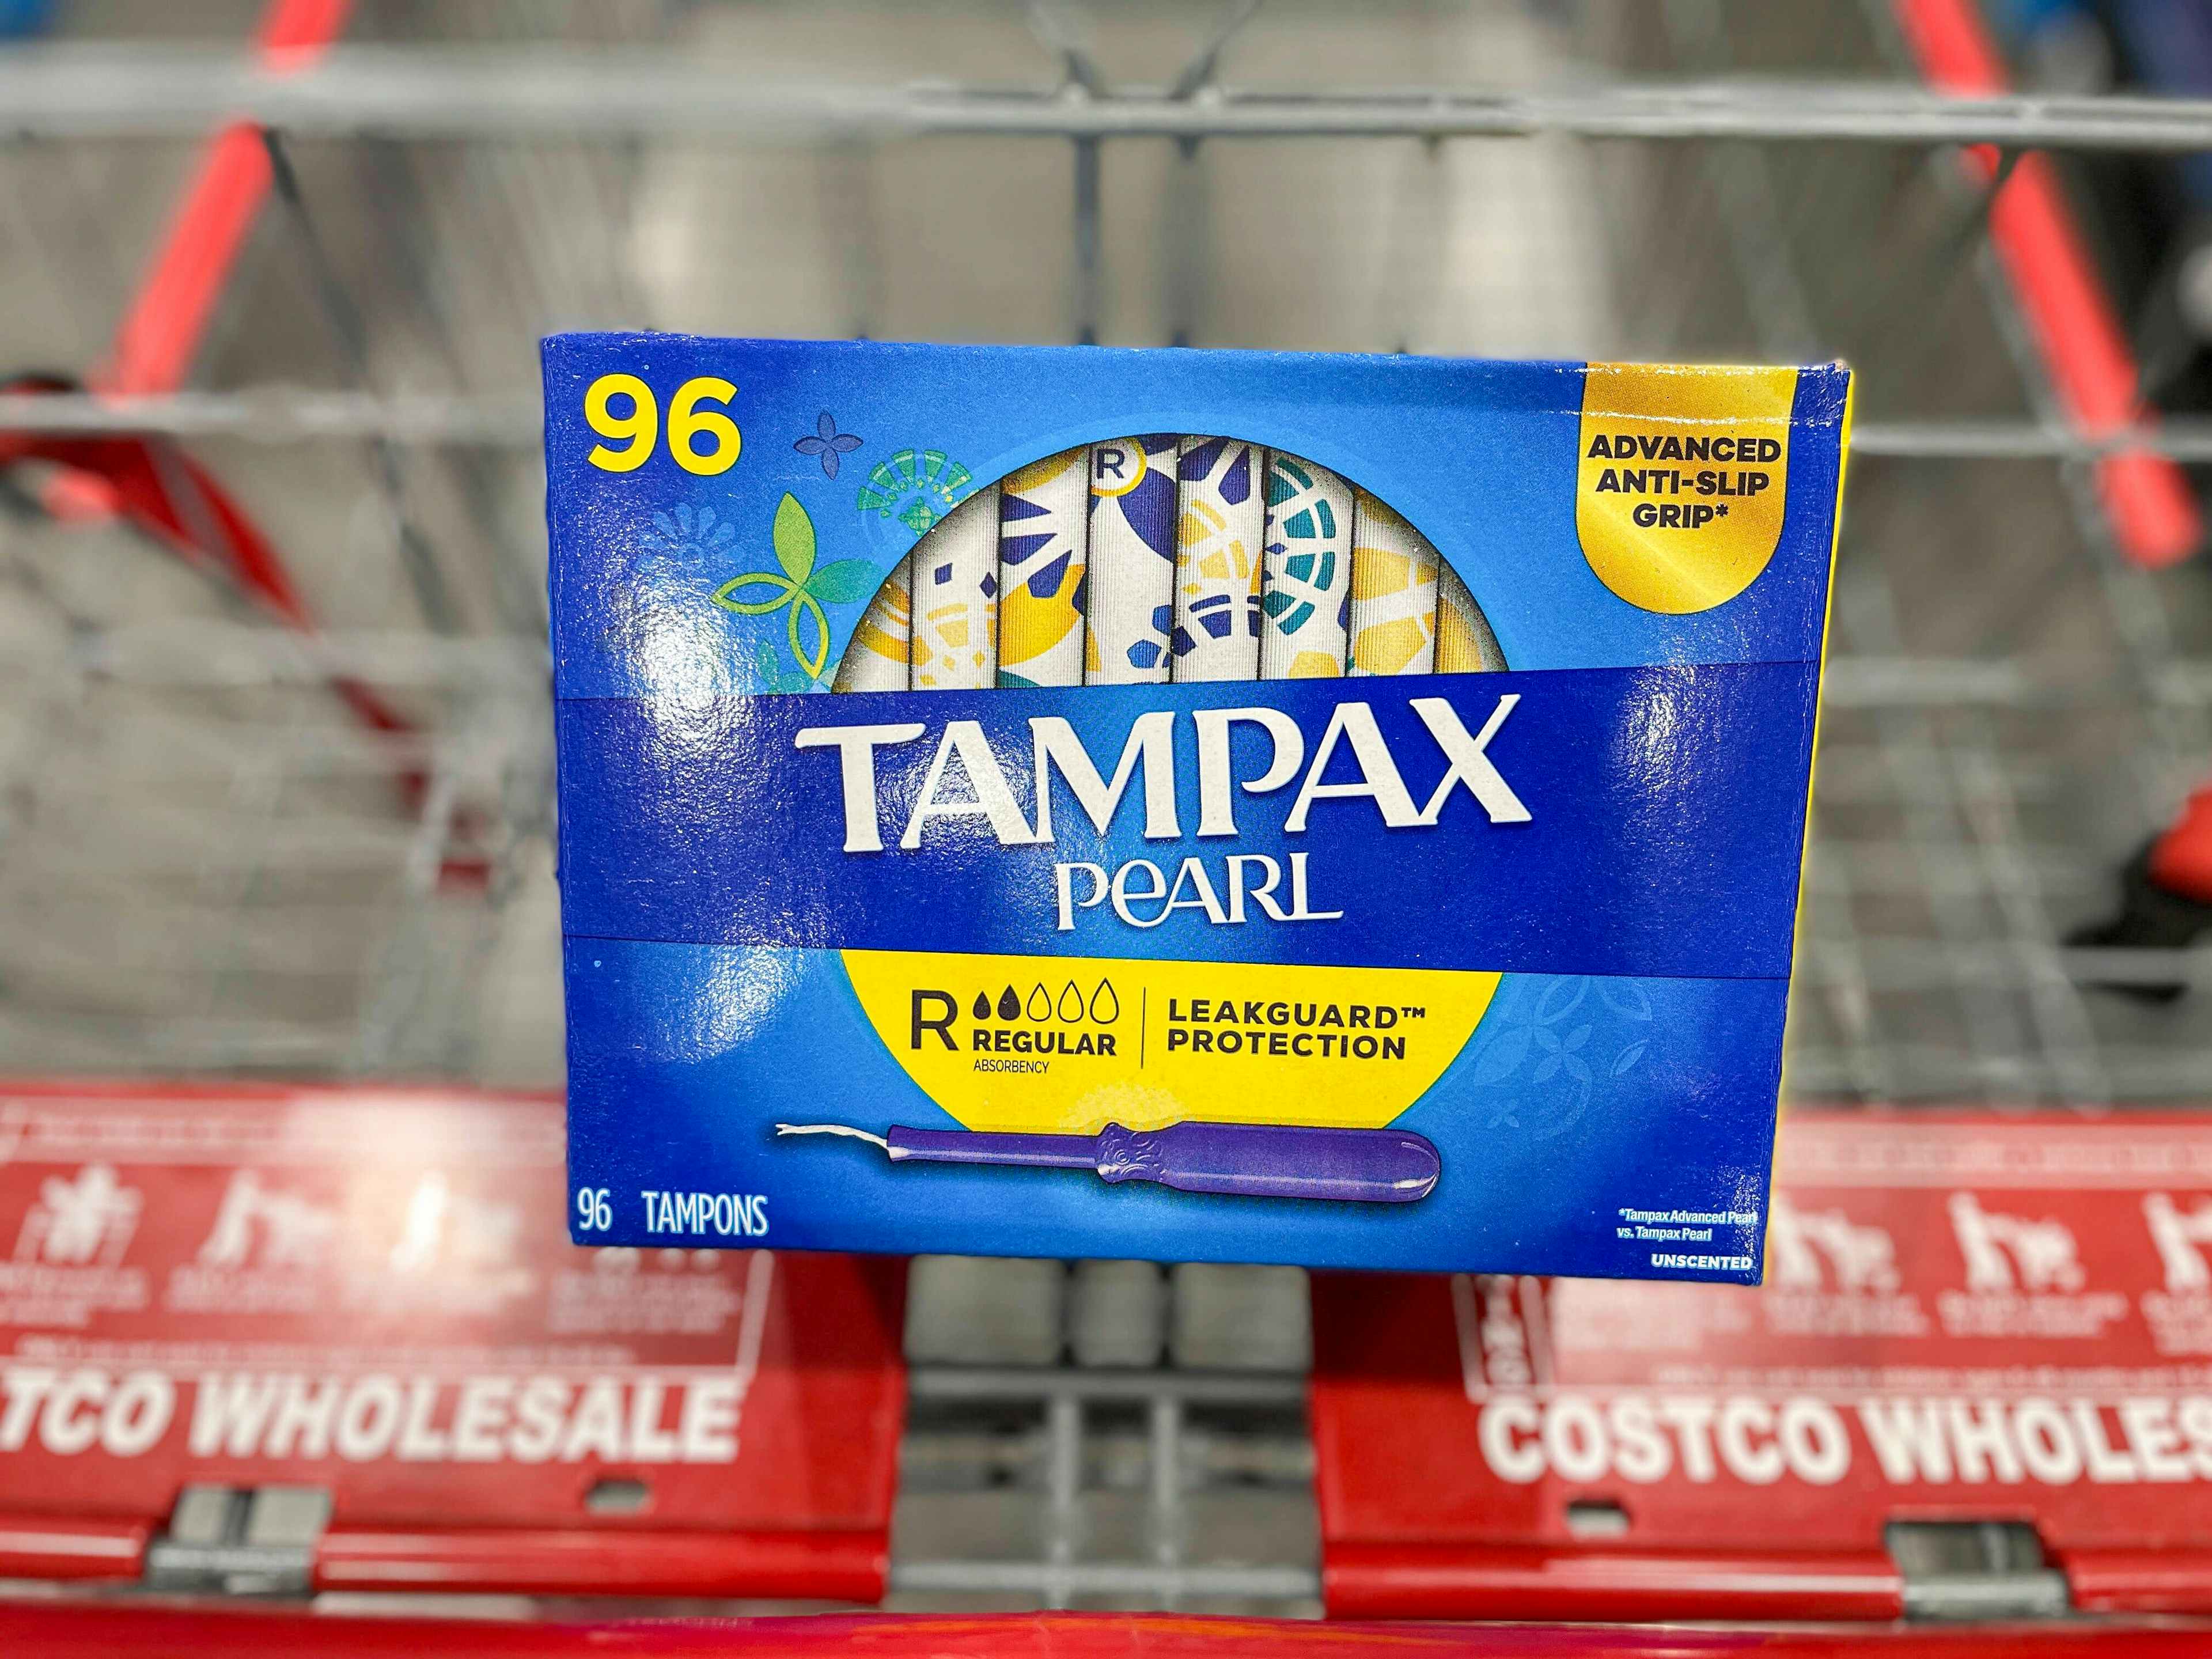 costco-tampax-pearl-tampons-4-sv